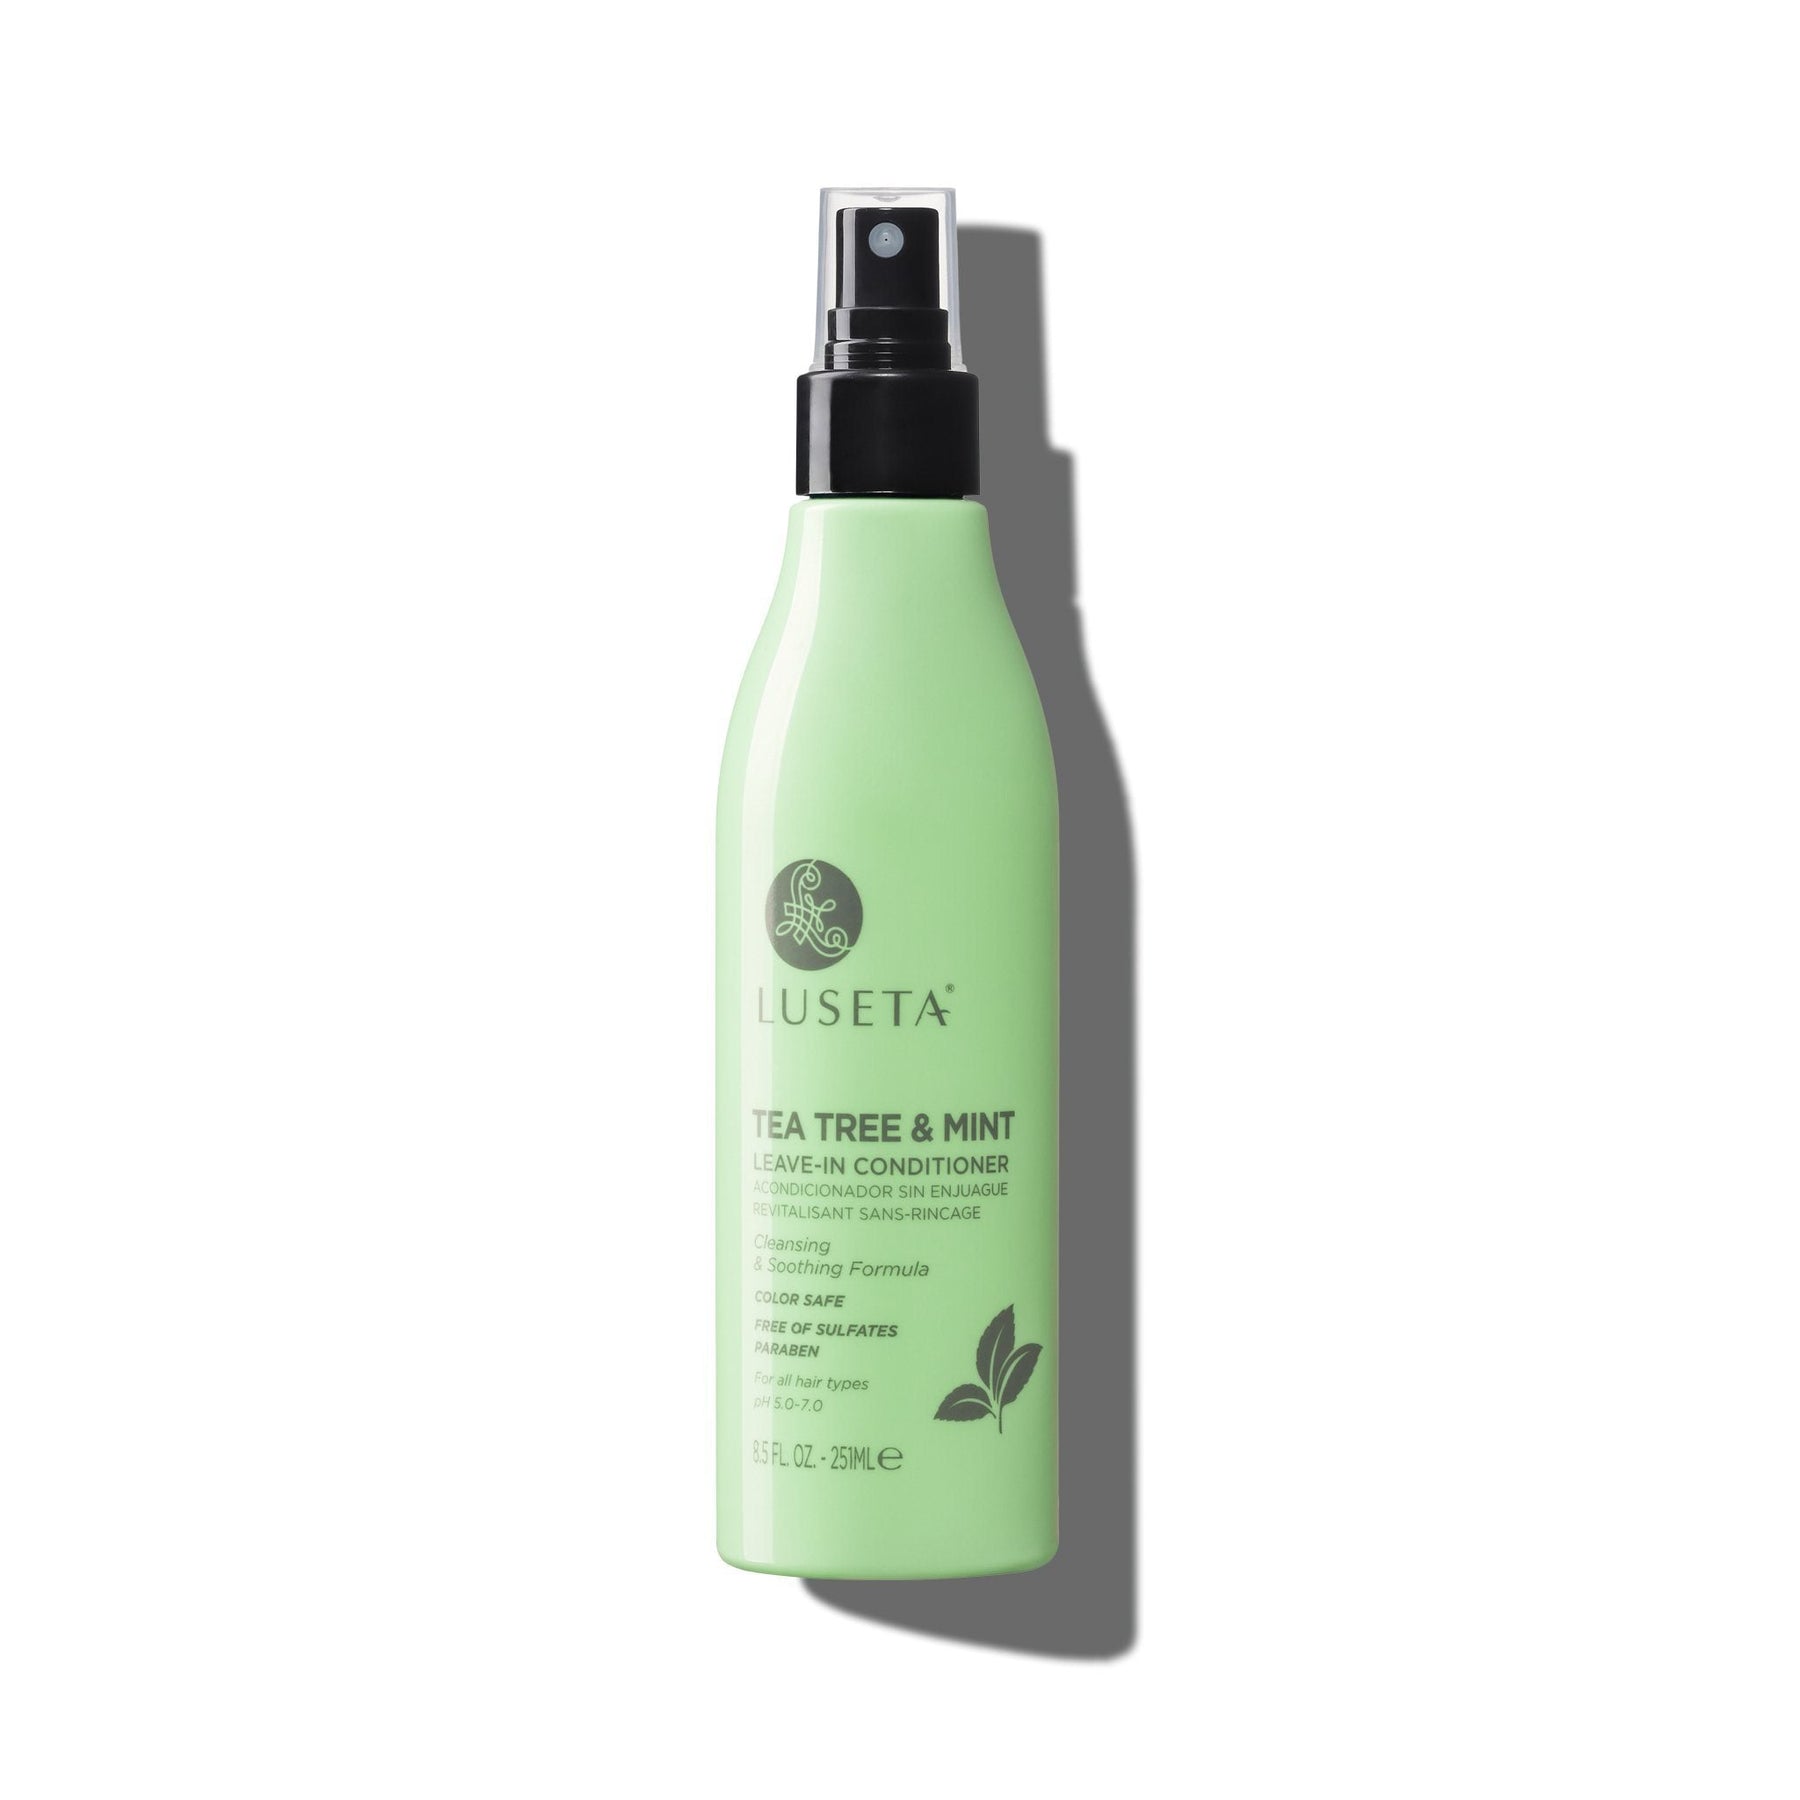 Tea Tree & Mint Leave-in Conditioner - by Luseta Beauty |ProCare Outlet|